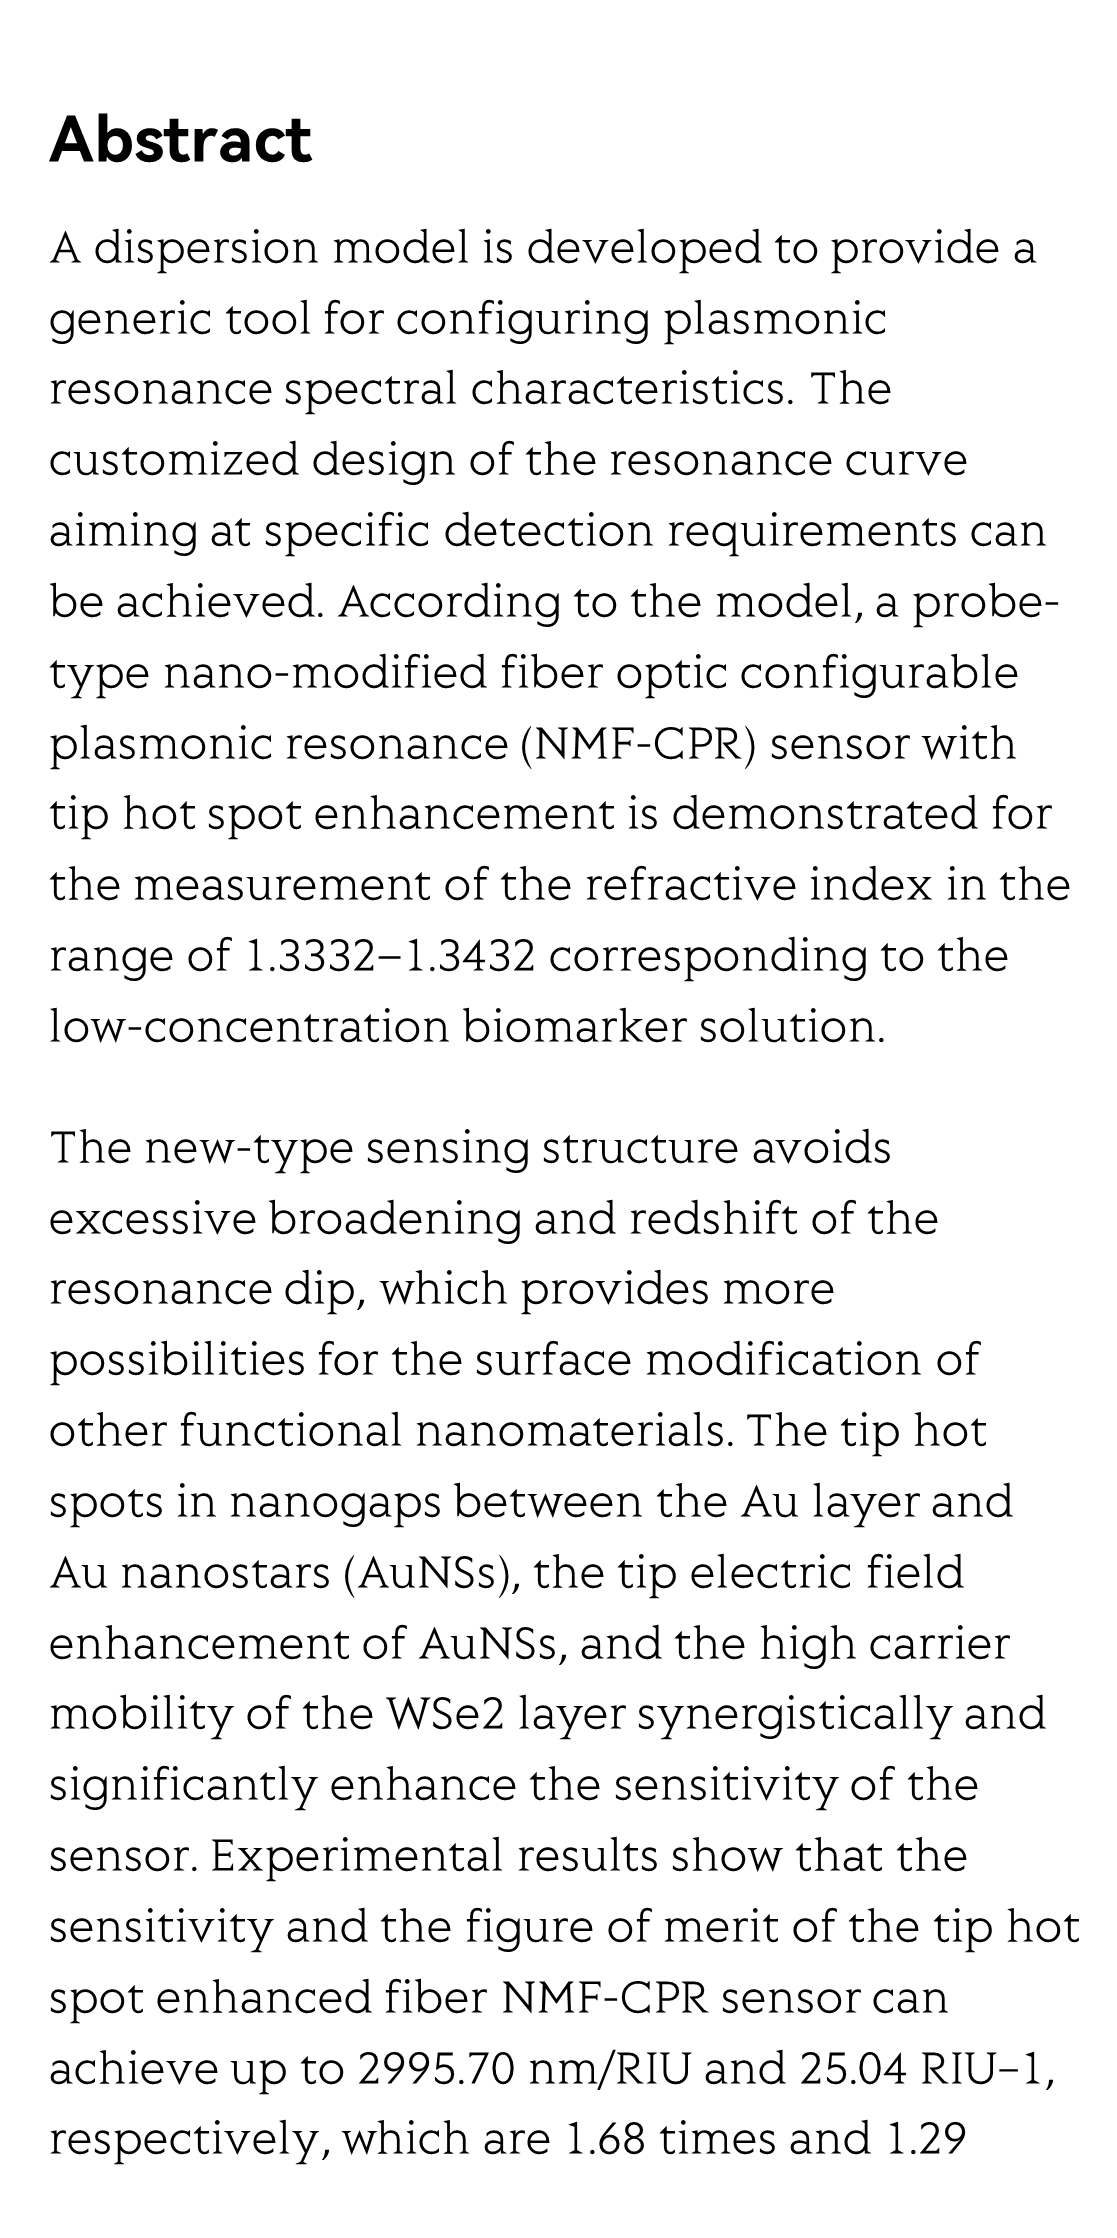 Highly sensitive and stable probe refractometer based on configurable plasmonic resonance with nano-modified fiber core_2